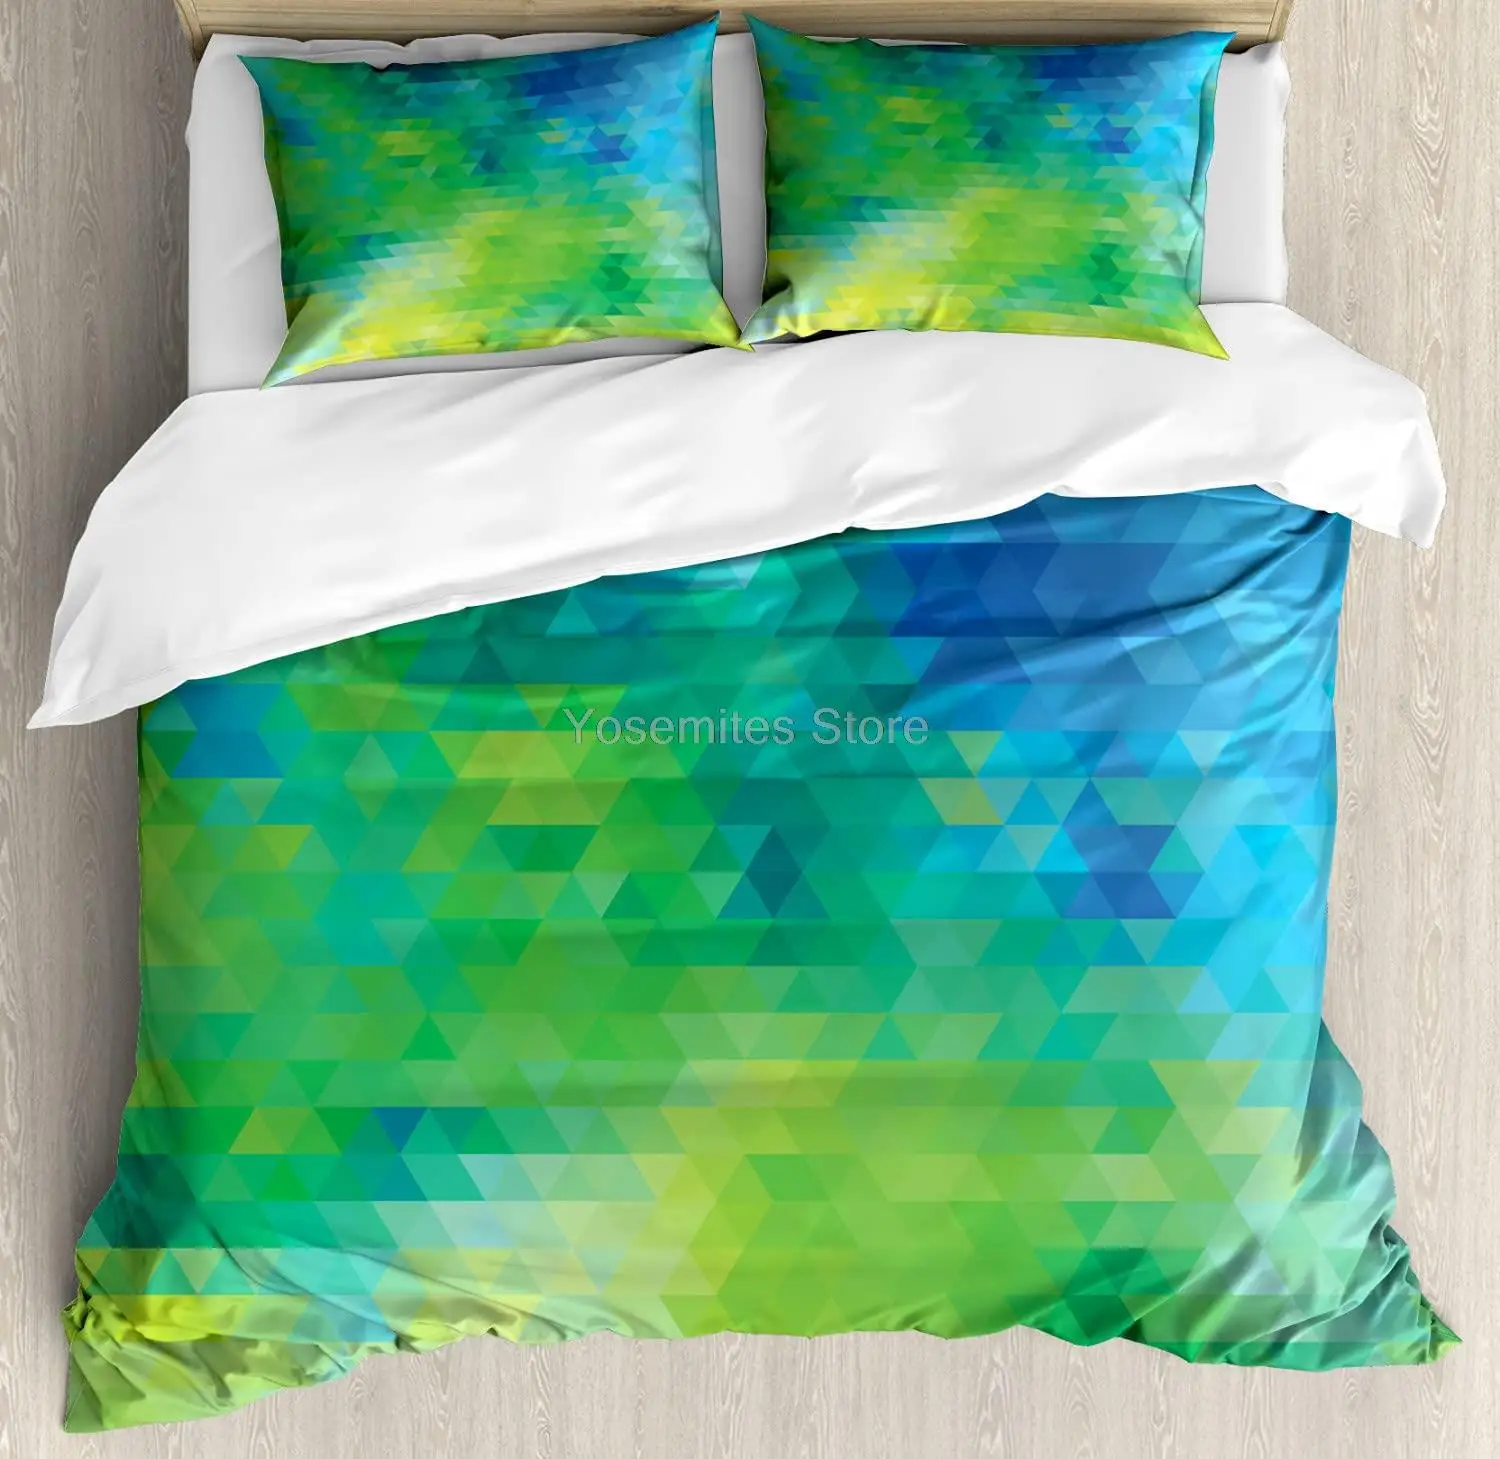 Green and Blue Duvet Cover Set, Geometric Abstract Pattern with Triangles Ombre Inspired, Decorative 3 Piece Bedding Set with 2